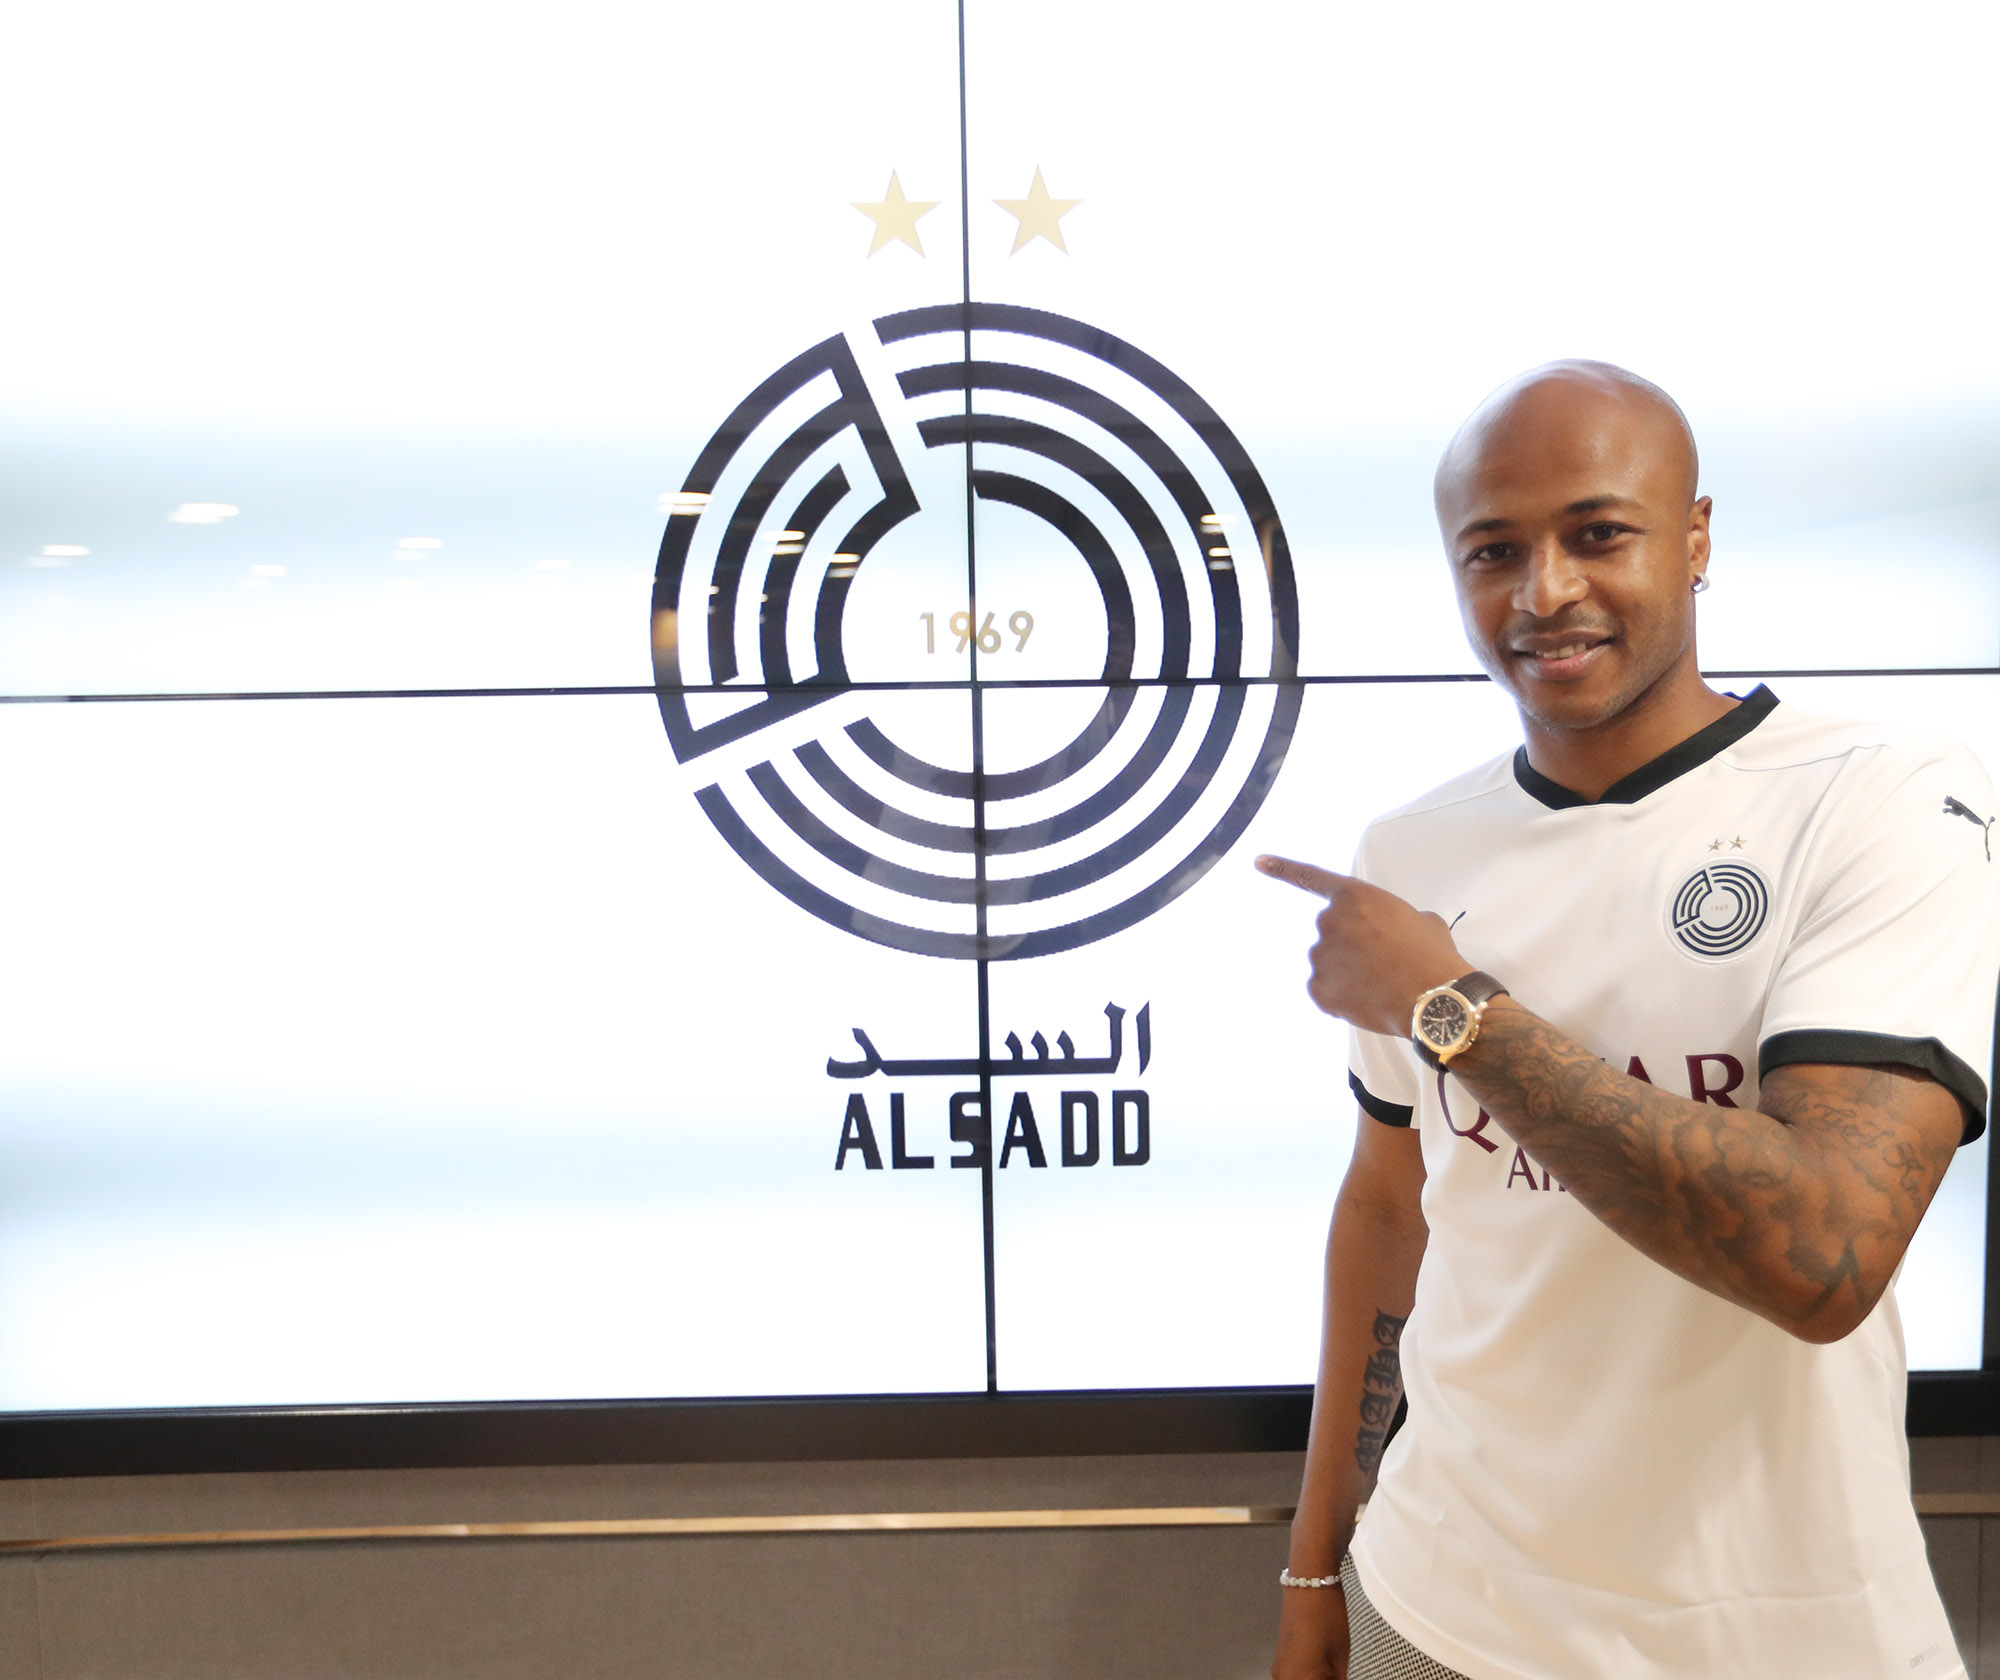 Andre Ayew reveals Al Sadd is an Ayew family team